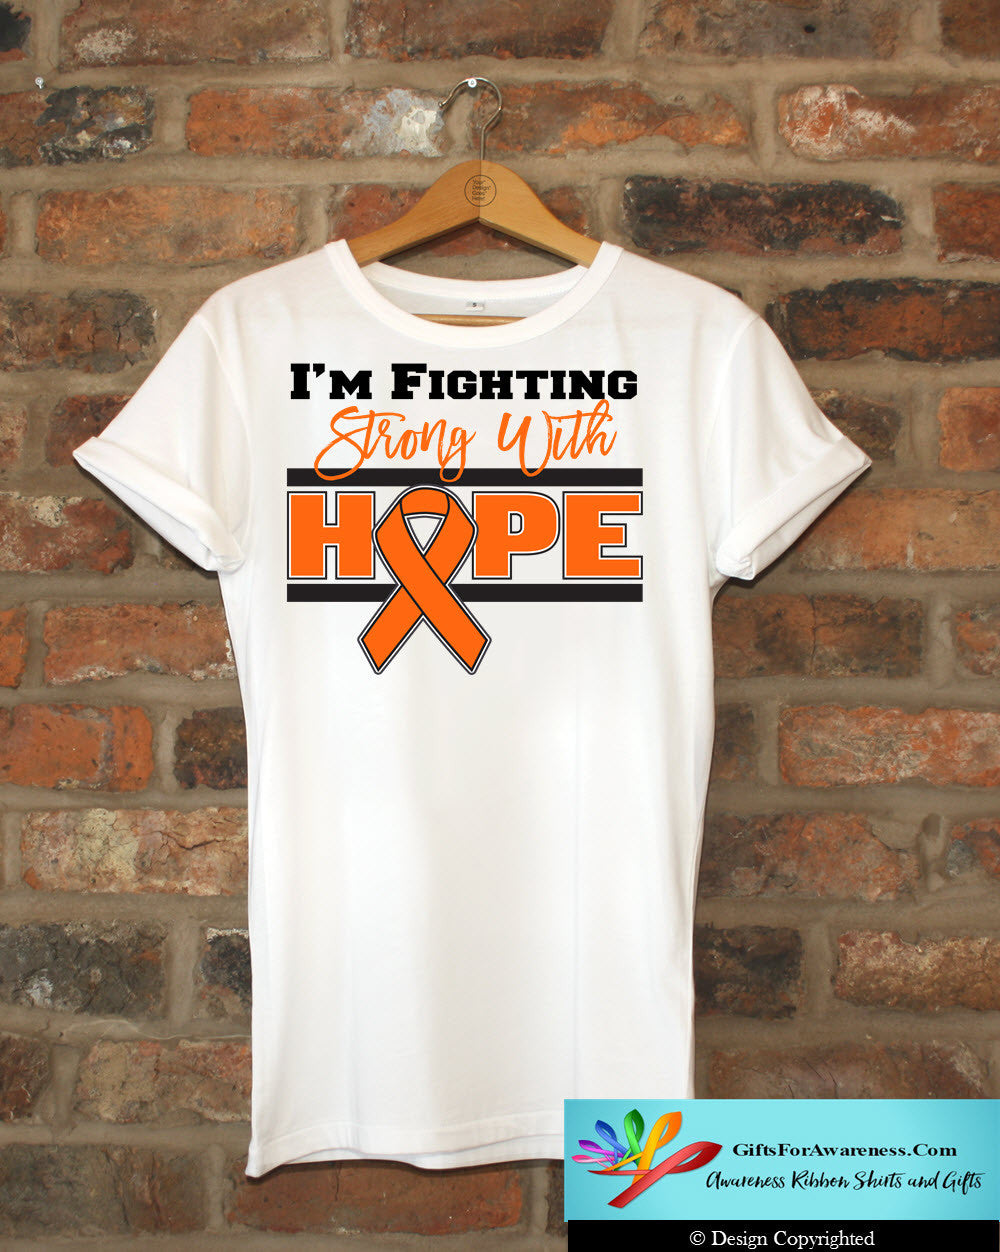 Kidney Cancer I'm Fighting Strong With Hope Shirts - GiftsForAwareness